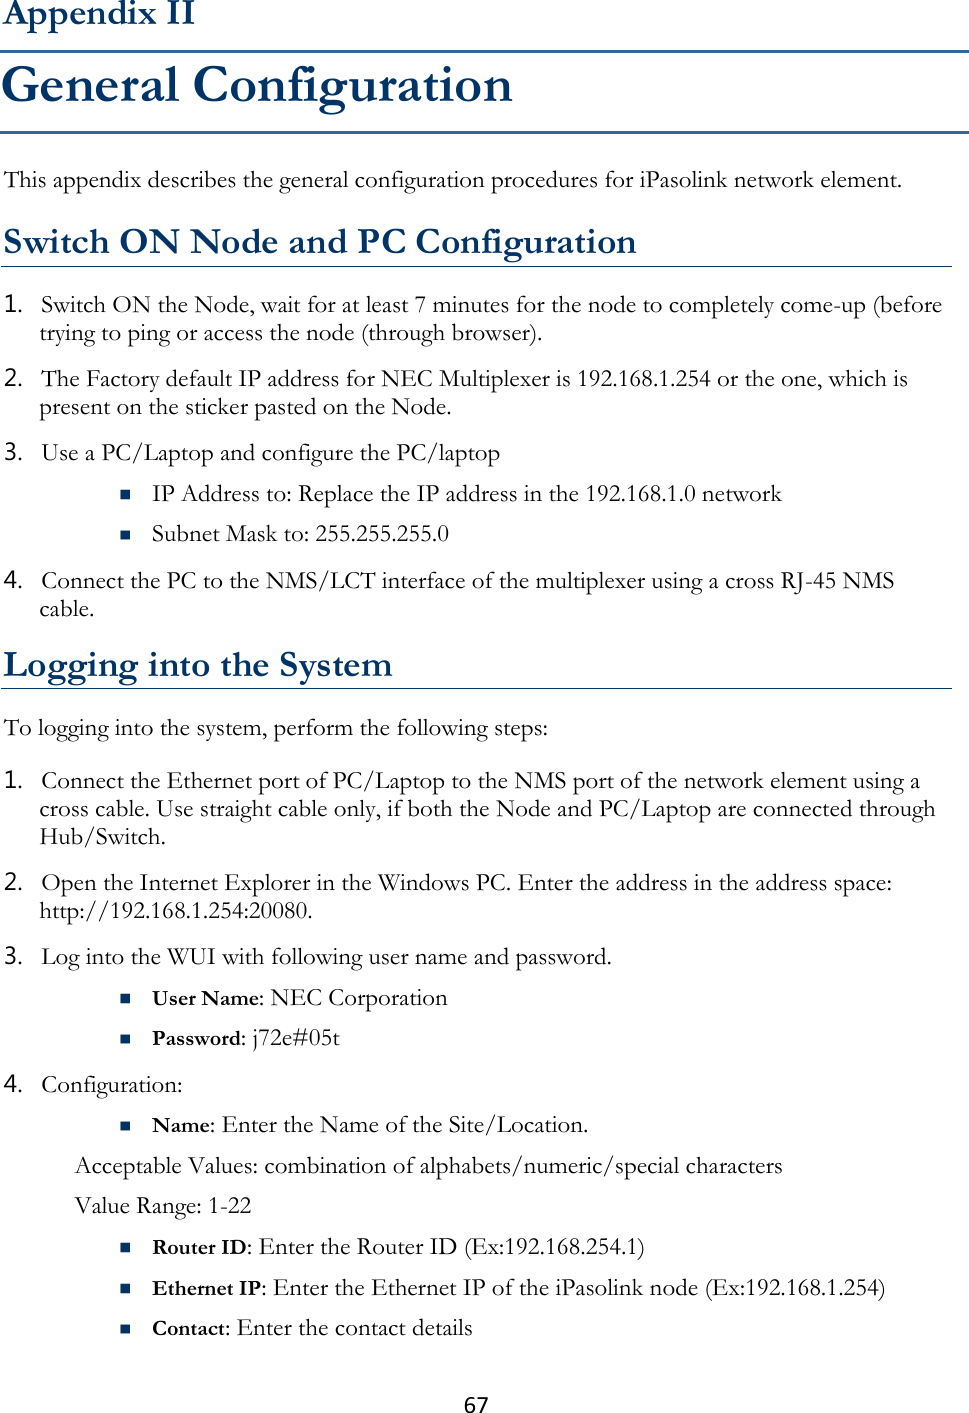 67  This appendix describes the general configuration procedures for iPasolink network element.  Switch ON Node and PC Configuration 1. Switch ON the Node, wait for at least 7 minutes for the node to completely come-up (before trying to ping or access the node (through browser). 2. The Factory default IP address for NEC Multiplexer is 192.168.1.254 or the one, which is present on the sticker pasted on the Node. 3. Use a PC/Laptop and configure the PC/laptop  IP Address to: Replace the IP address in the 192.168.1.0 network  Subnet Mask to: 255.255.255.0 4. Connect the PC to the NMS/LCT interface of the multiplexer using a cross RJ-45 NMS cable.  Logging into the System To logging into the system, perform the following steps: 1. Connect the Ethernet port of PC/Laptop to the NMS port of the network element using a cross cable. Use straight cable only, if both the Node and PC/Laptop are connected through Hub/Switch. 2. Open the Internet Explorer in the Windows PC. Enter the address in the address space: http://192.168.1.254:20080. 3. Log into the WUI with following user name and password.  User Name: NEC Corporation  Password: j72e#05t 4. Configuration:  Name: Enter the Name of the Site/Location. Acceptable Values: combination of alphabets/numeric/special characters  Value Range: 1-22  Router ID: Enter the Router ID (Ex:192.168.254.1)  Ethernet IP: Enter the Ethernet IP of the iPasolink node (Ex:192.168.1.254)  Contact: Enter the contact details Appendix II General Configuration 